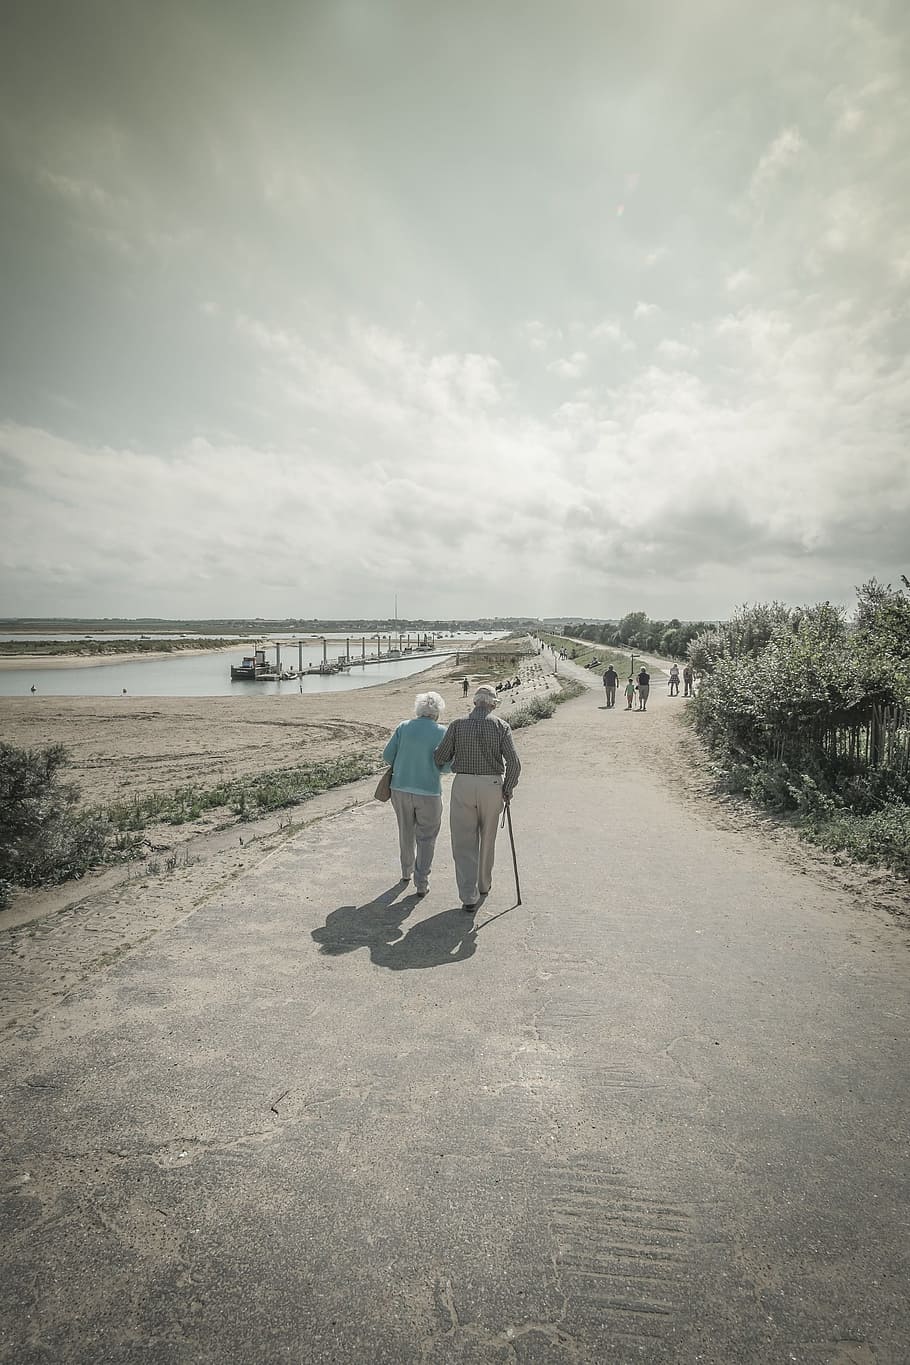 selective color of two person walking on road, old, couple, elderly